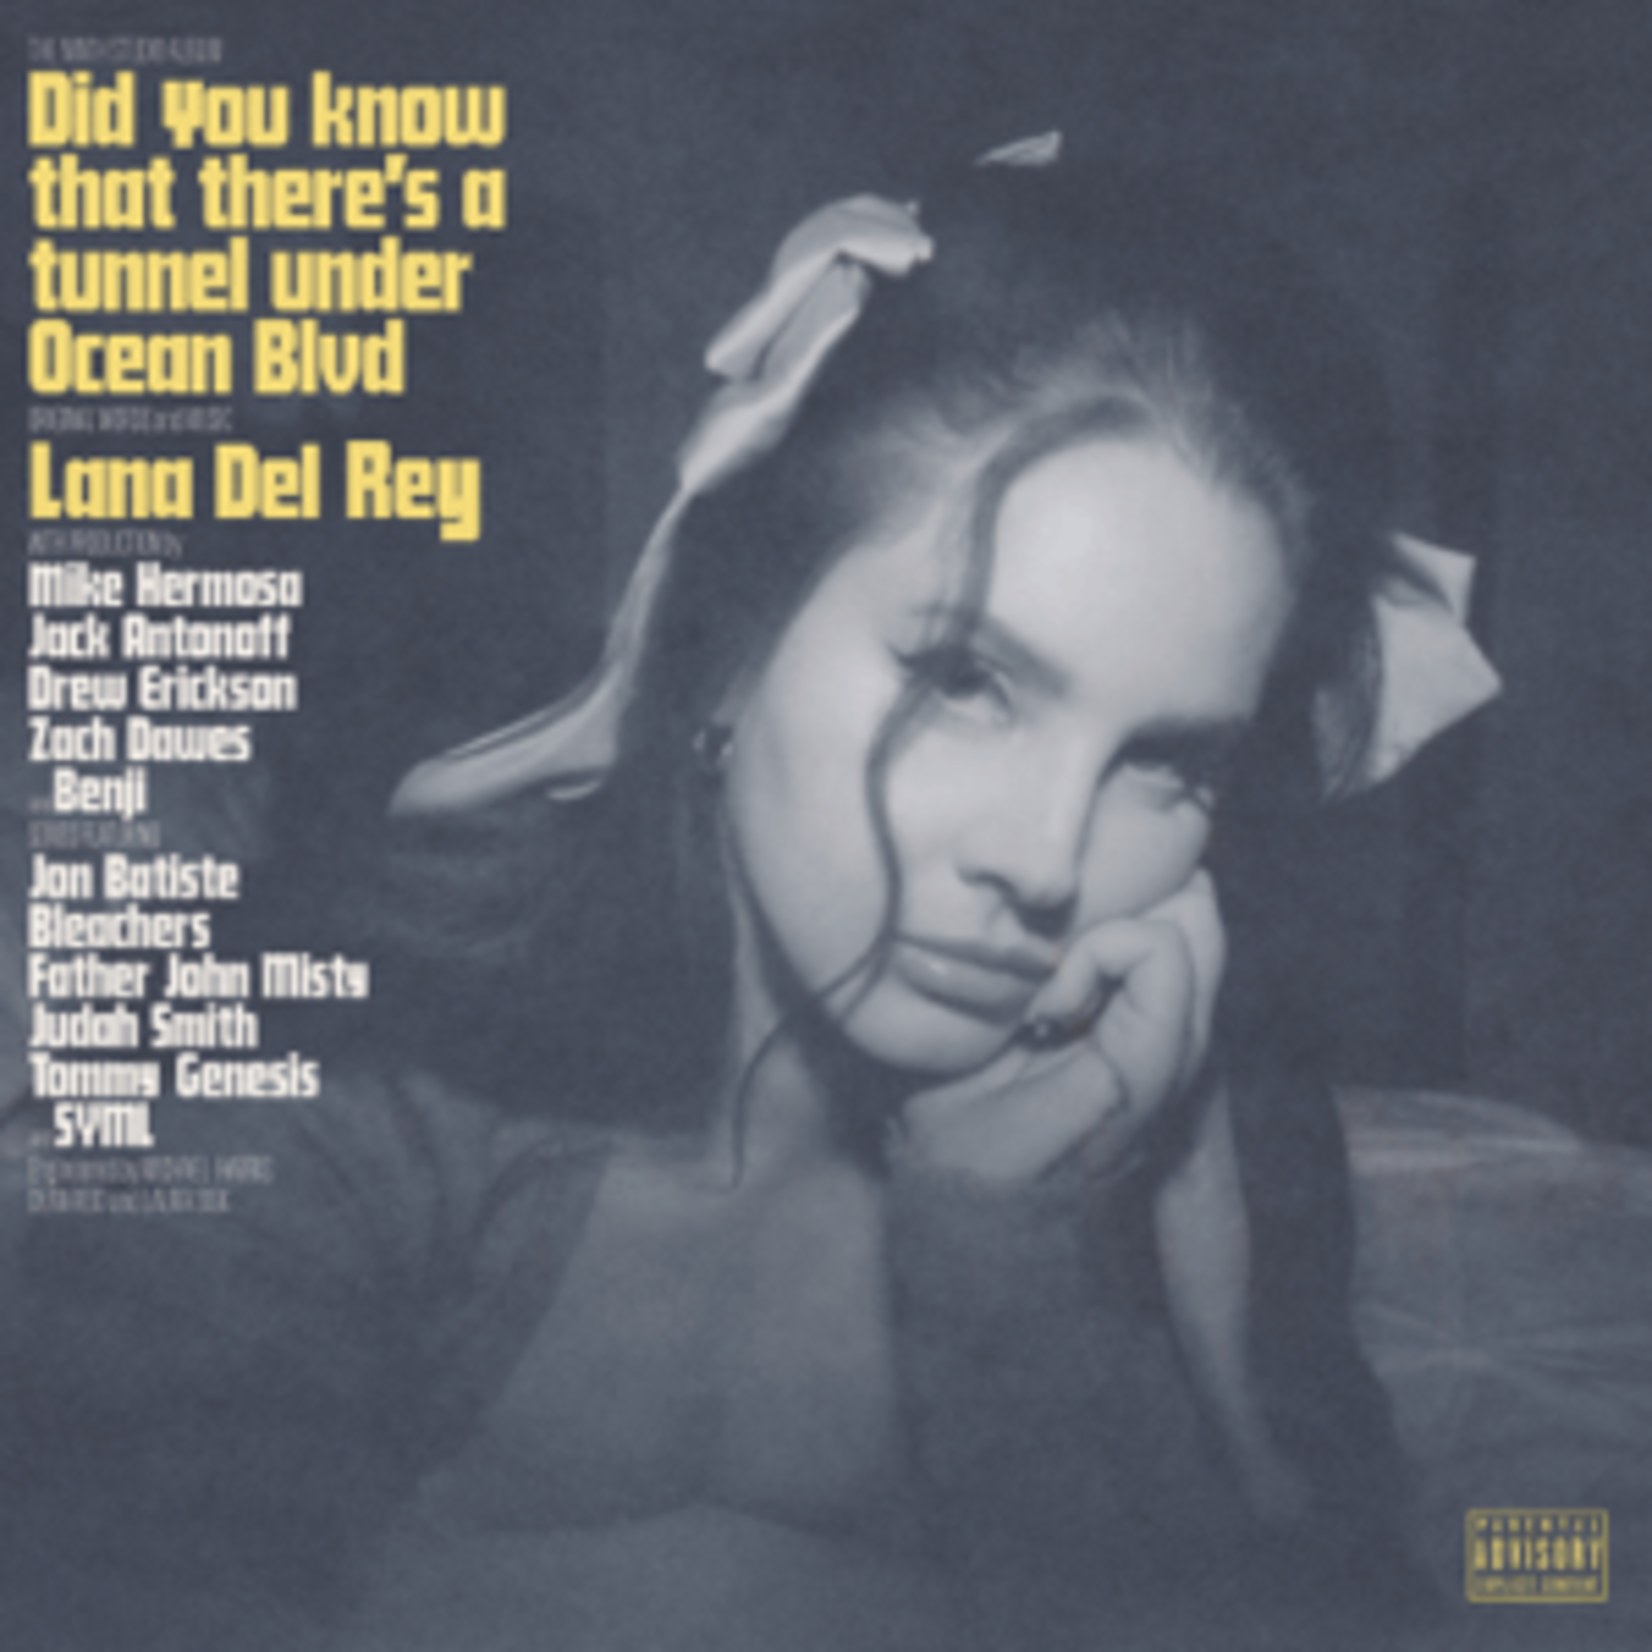 [New] Lana Del Rey - Did You Know That There's A Tunnel Under.. (2LP, 180g)